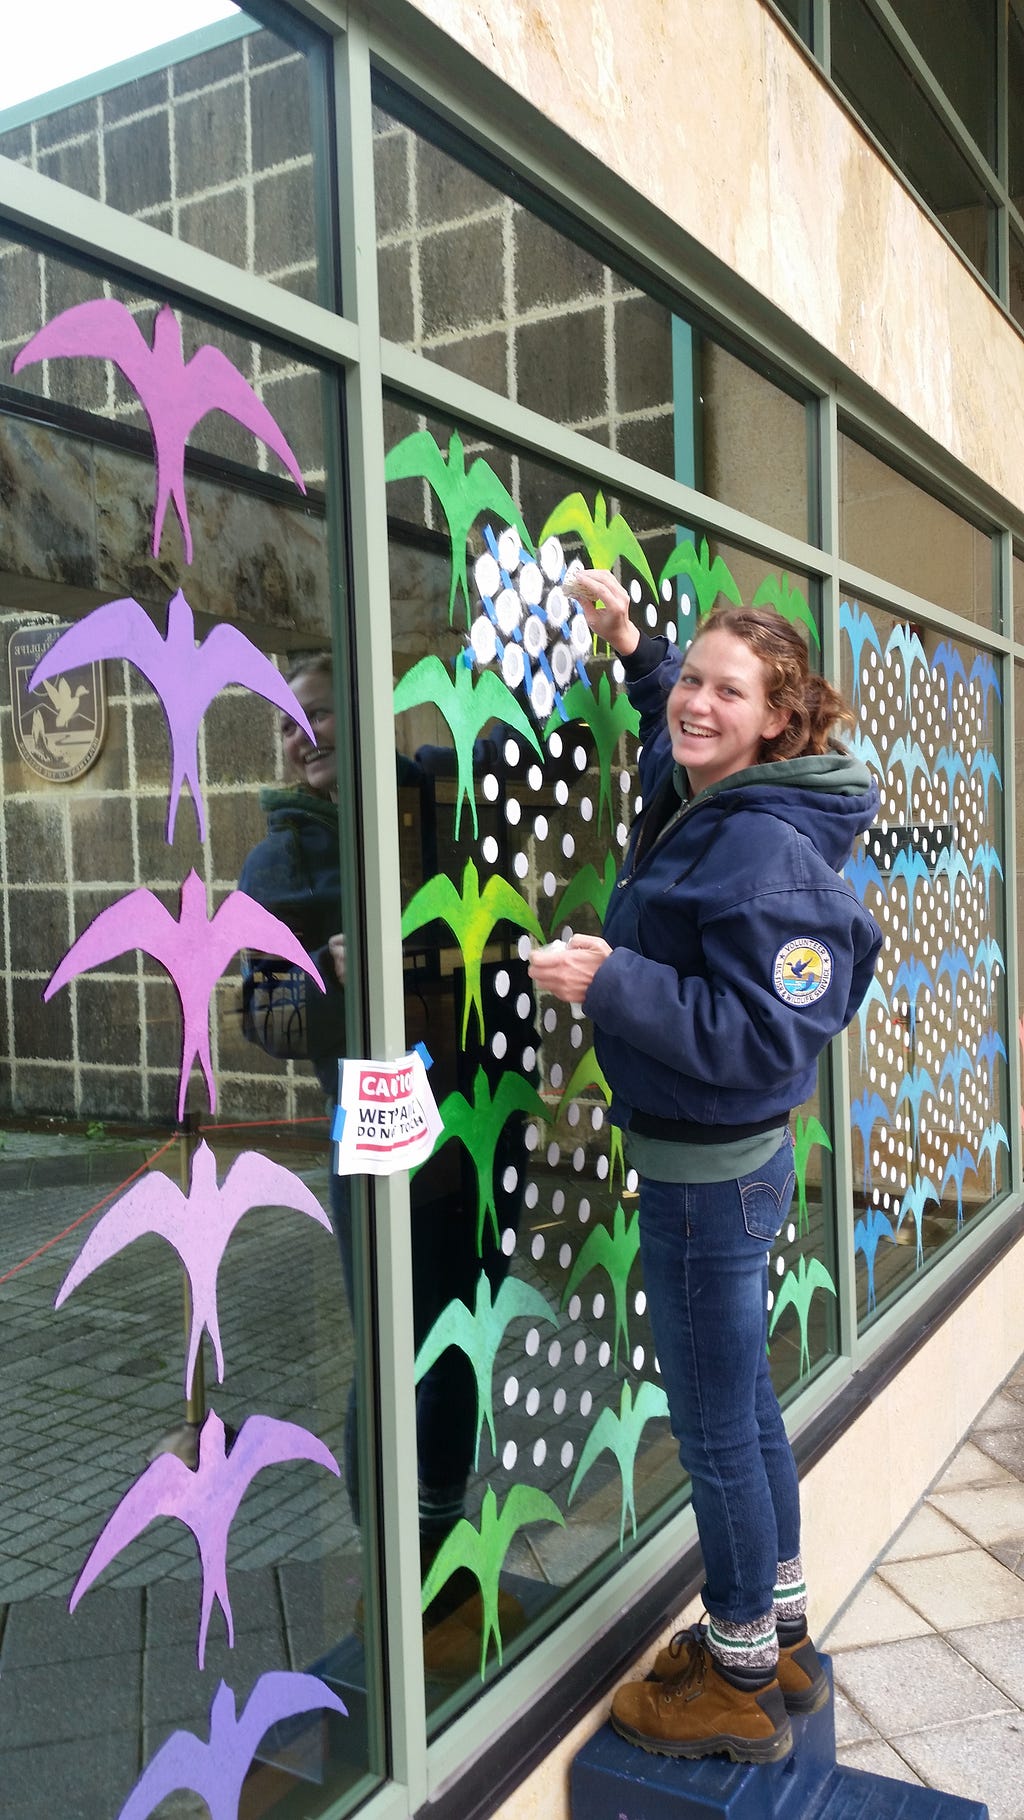 A staffer at Patuxent Research Refuge wearing blue jeans and a blue jacket with a U.S. Fish and Wildlife logo on the shoulder paints colorful designs on a large window in a row of windows. Among the window designs are bird-in-flight silhouettes in purple, green and blue.